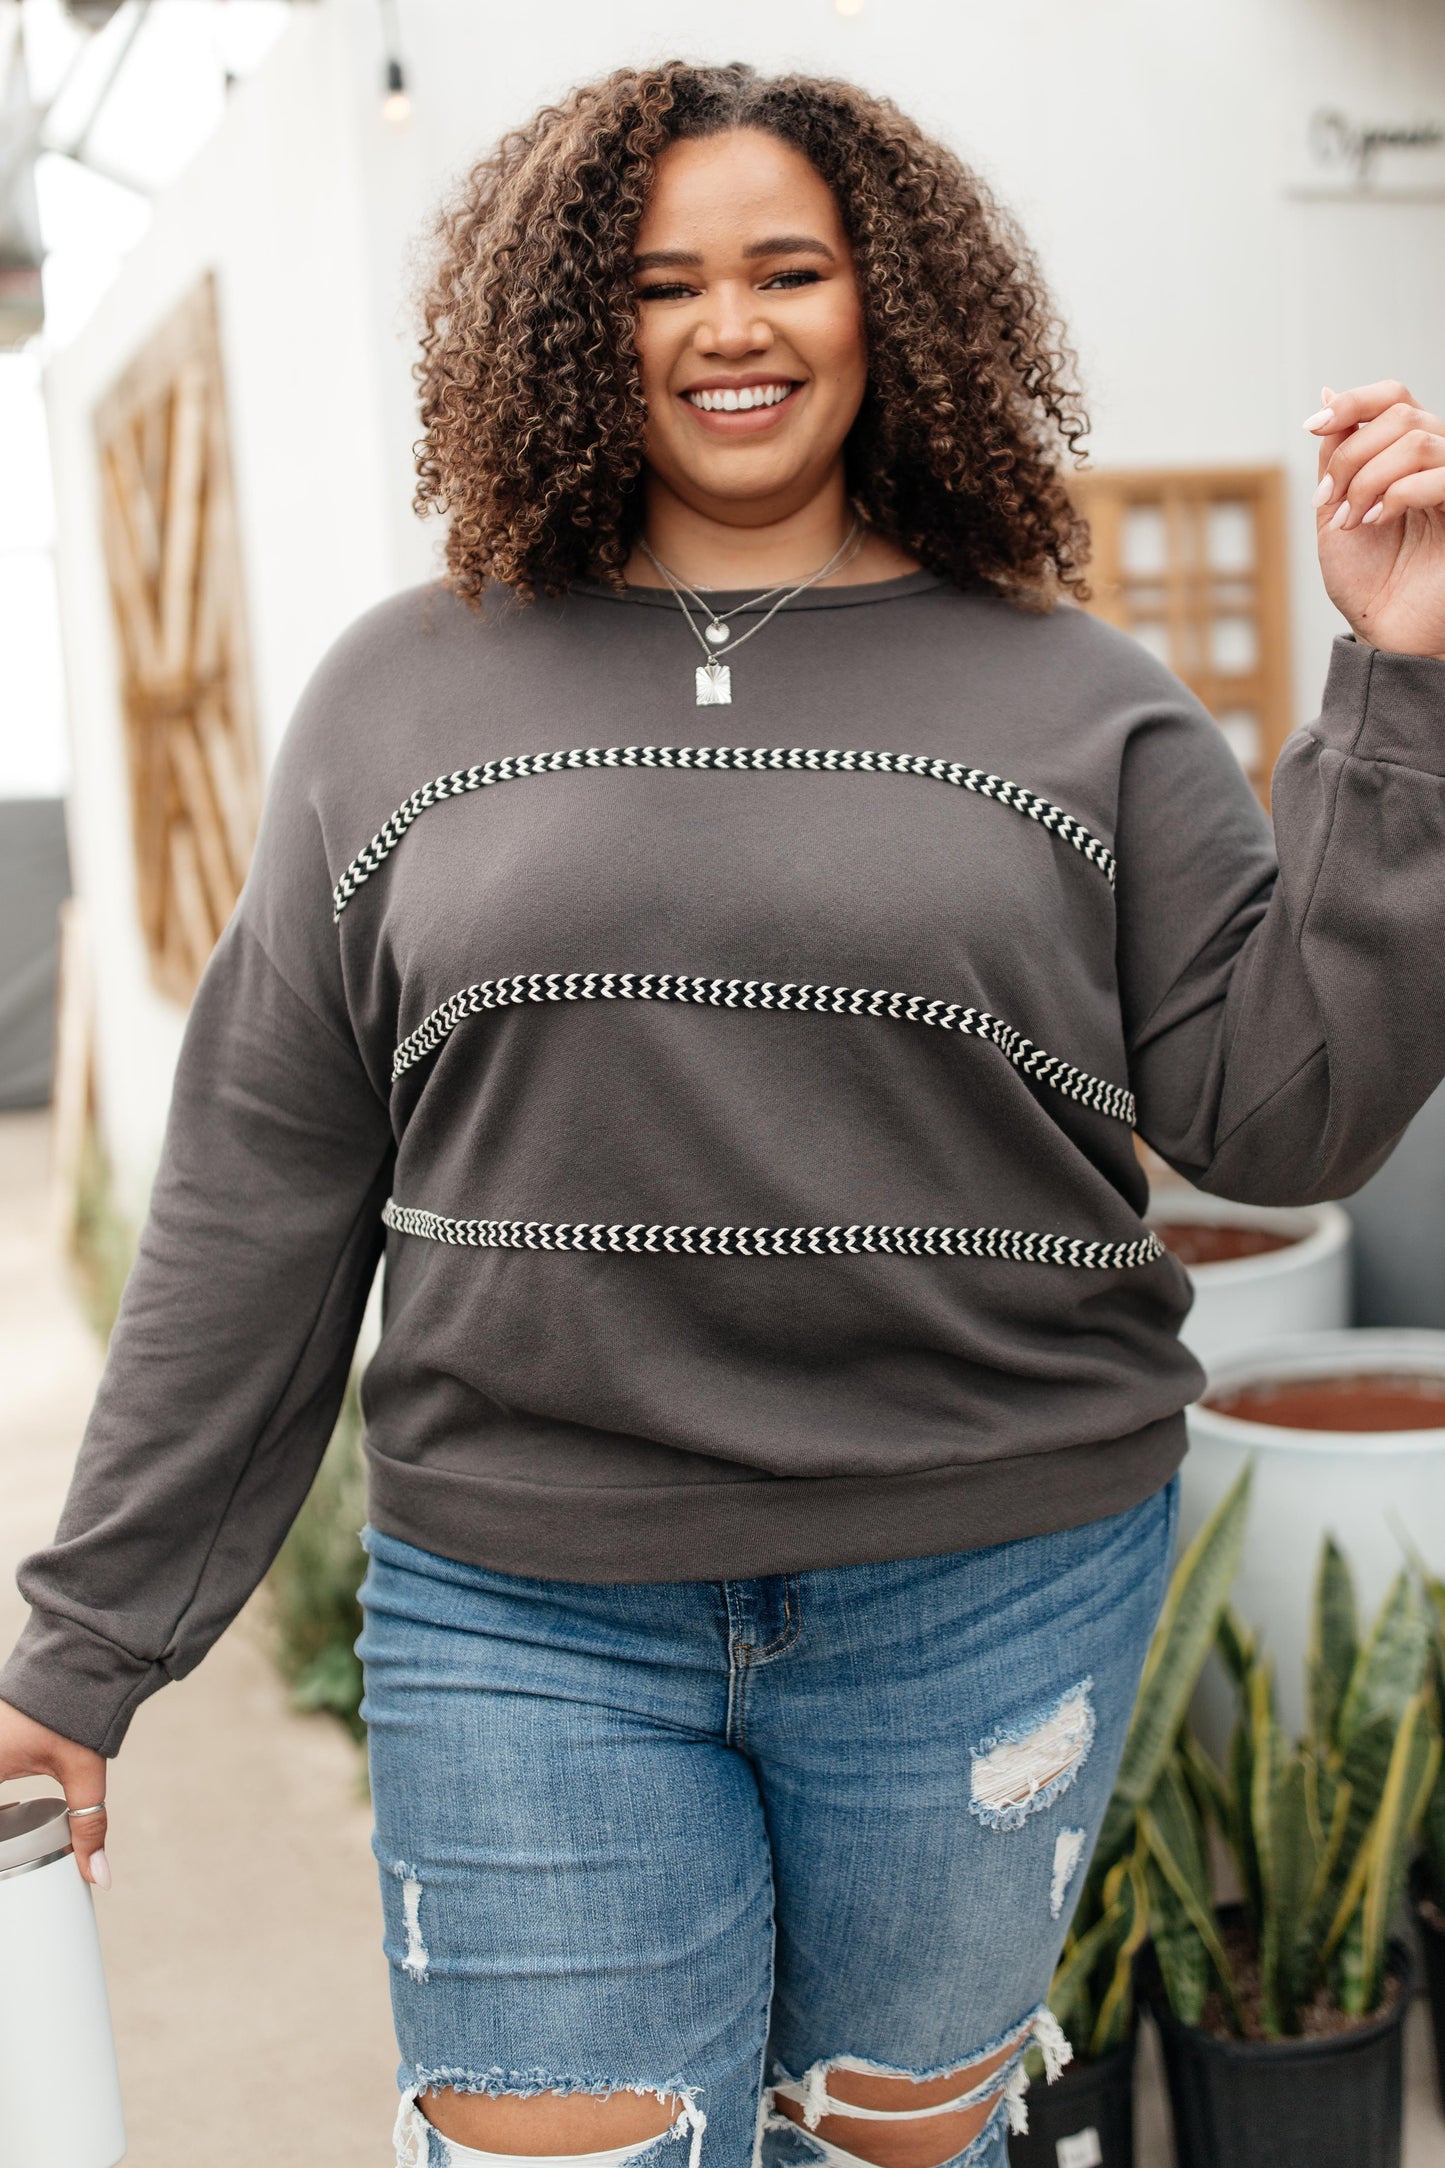 Stitched Together Pullover in Charcoal